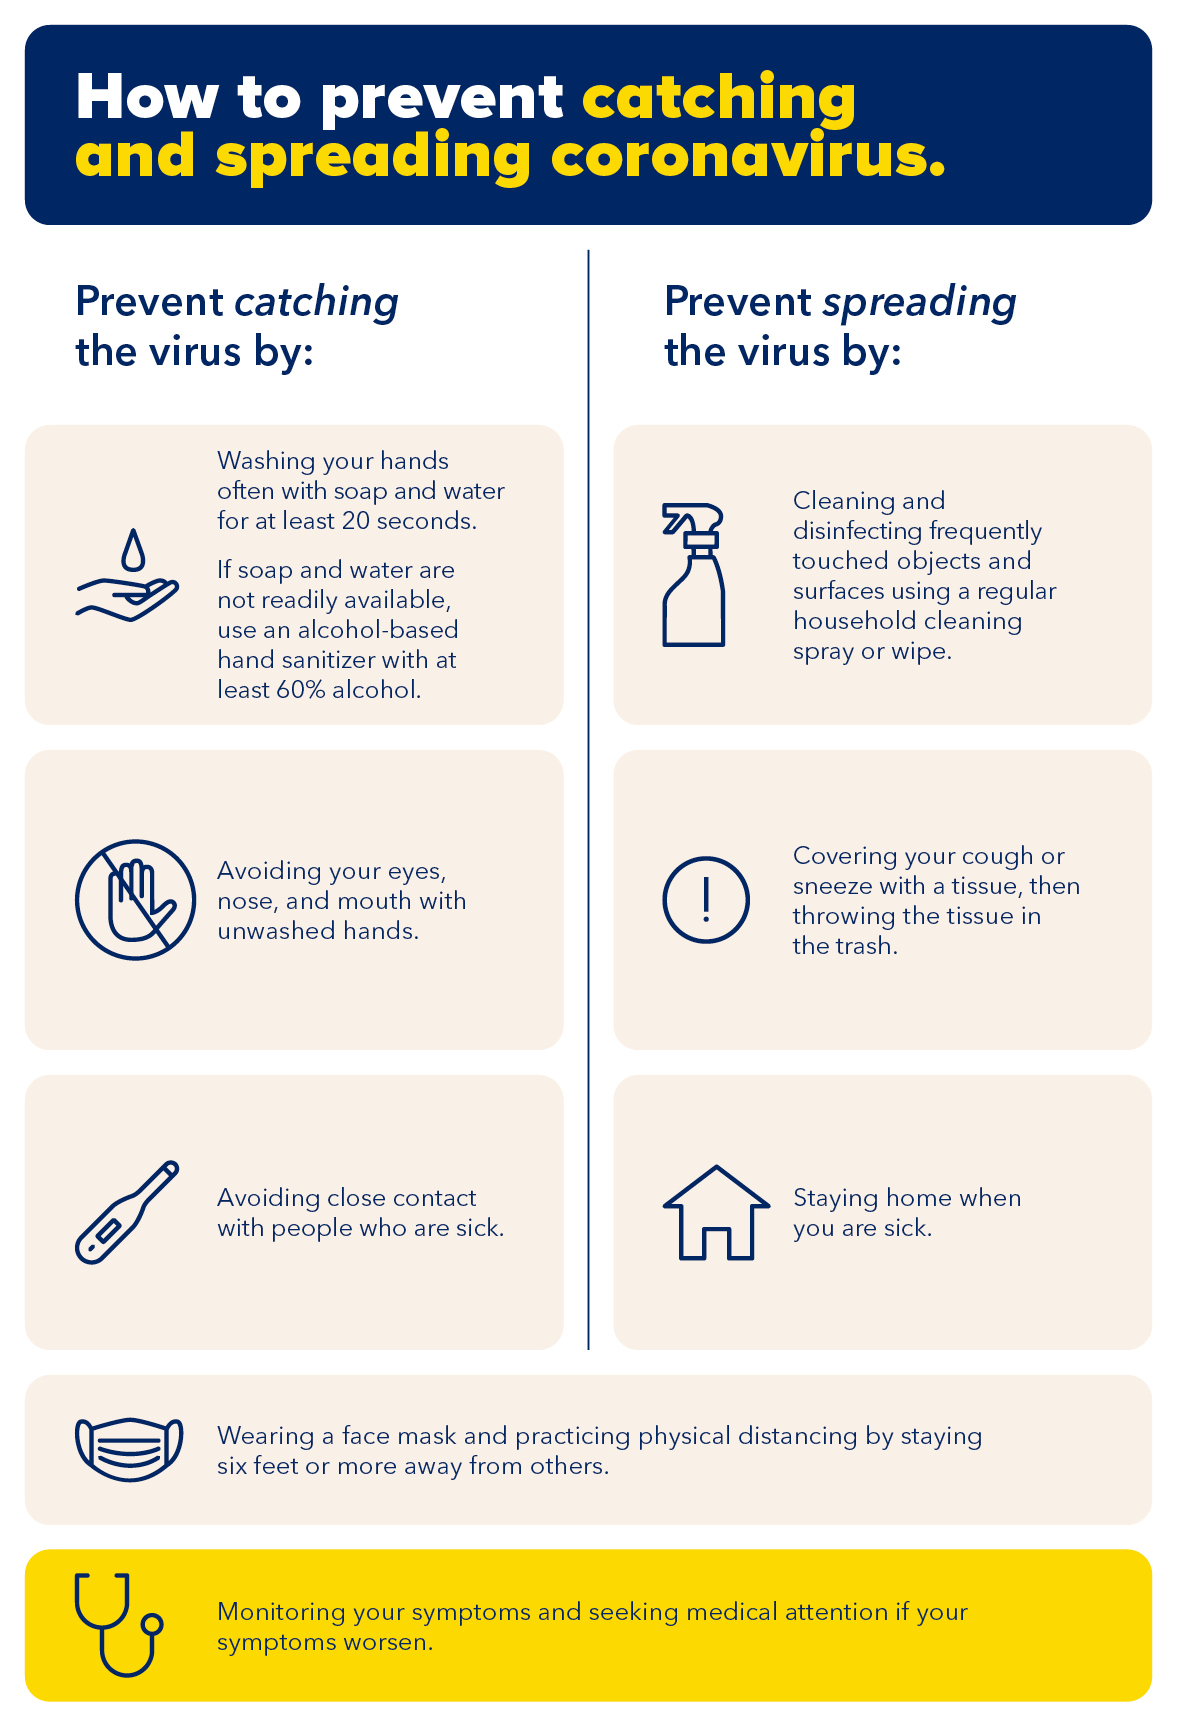 Infographic that outlines the ways to prevent the spread of COVID-19, including washing hands, avoiding close contact with others, avoiding touching your eyes, nose and mouth, monitoring for symptoms, cleaning surfaces regularly, covering your cough or sneeze, staying home when you are sick, and wearing a mask.